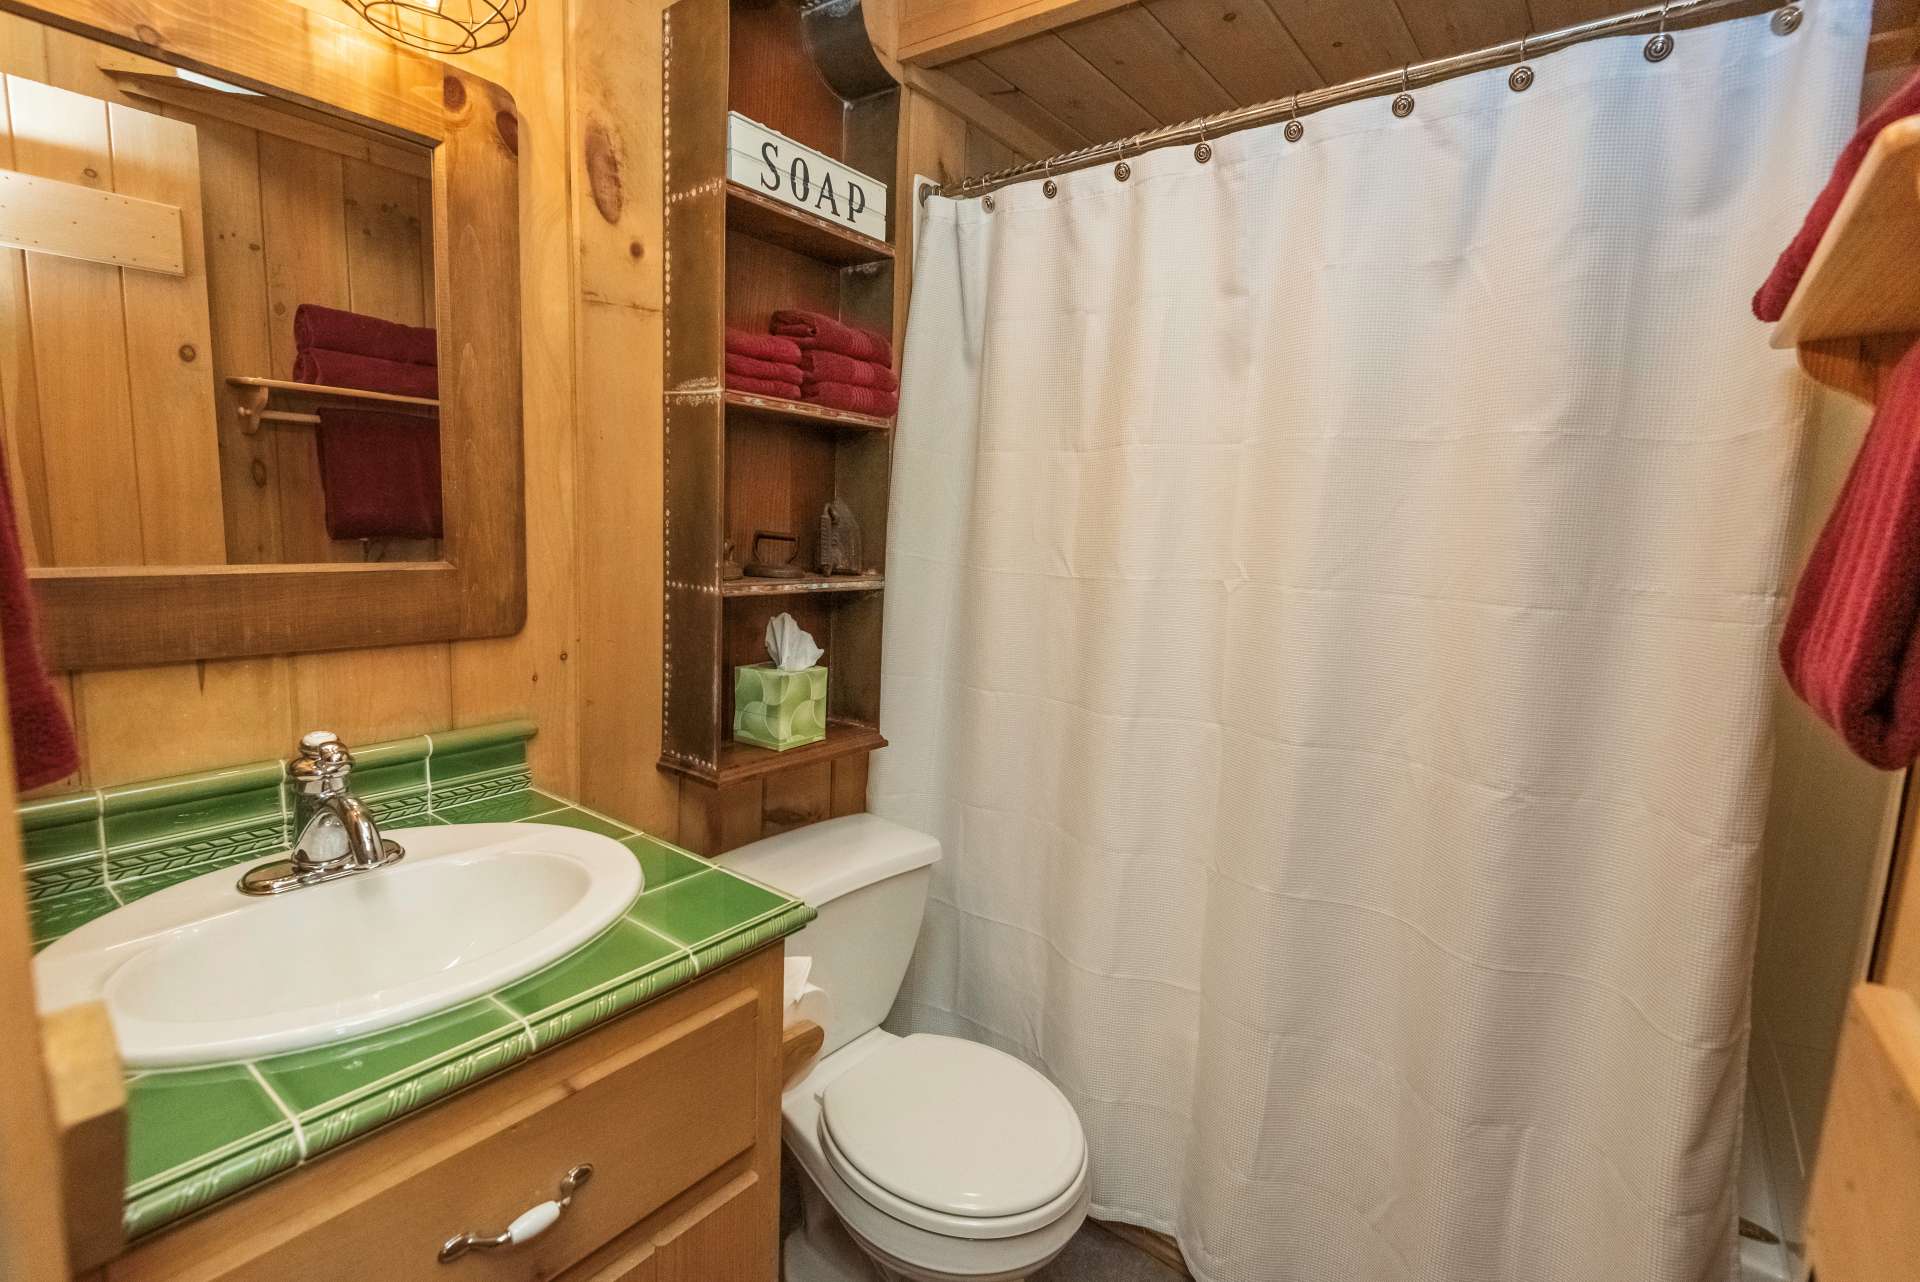 Lower level bath offers a jetted tub for relaxing after a full day of hiking mountain trails.